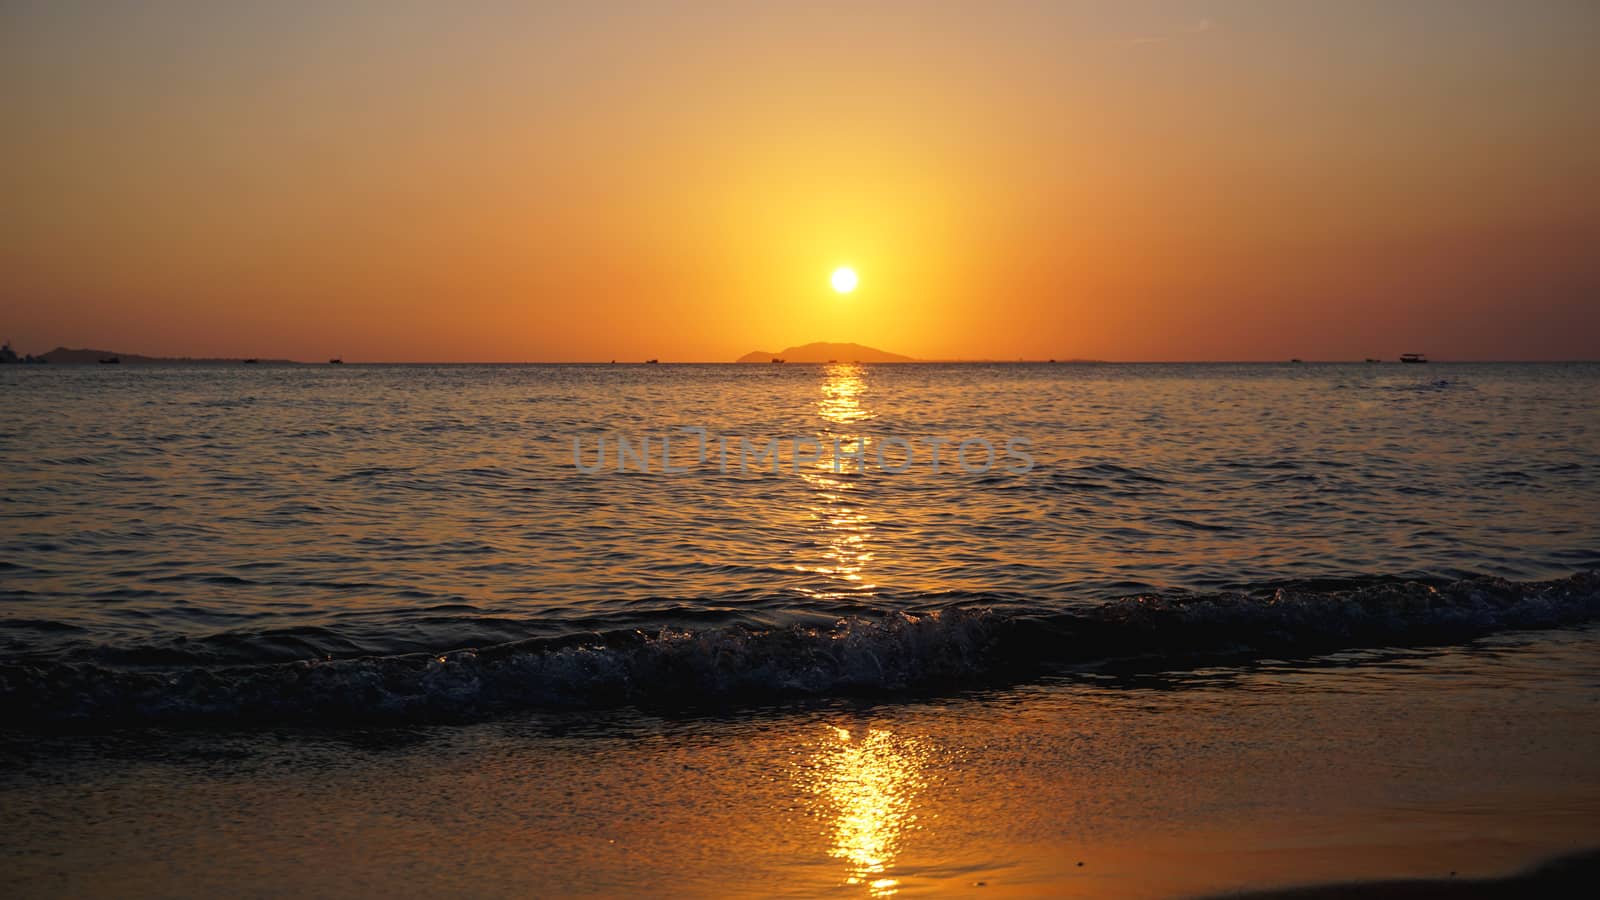 Bright sunset with yellow sun under the sea surface - Summer vacation and nature travel adventure concept.